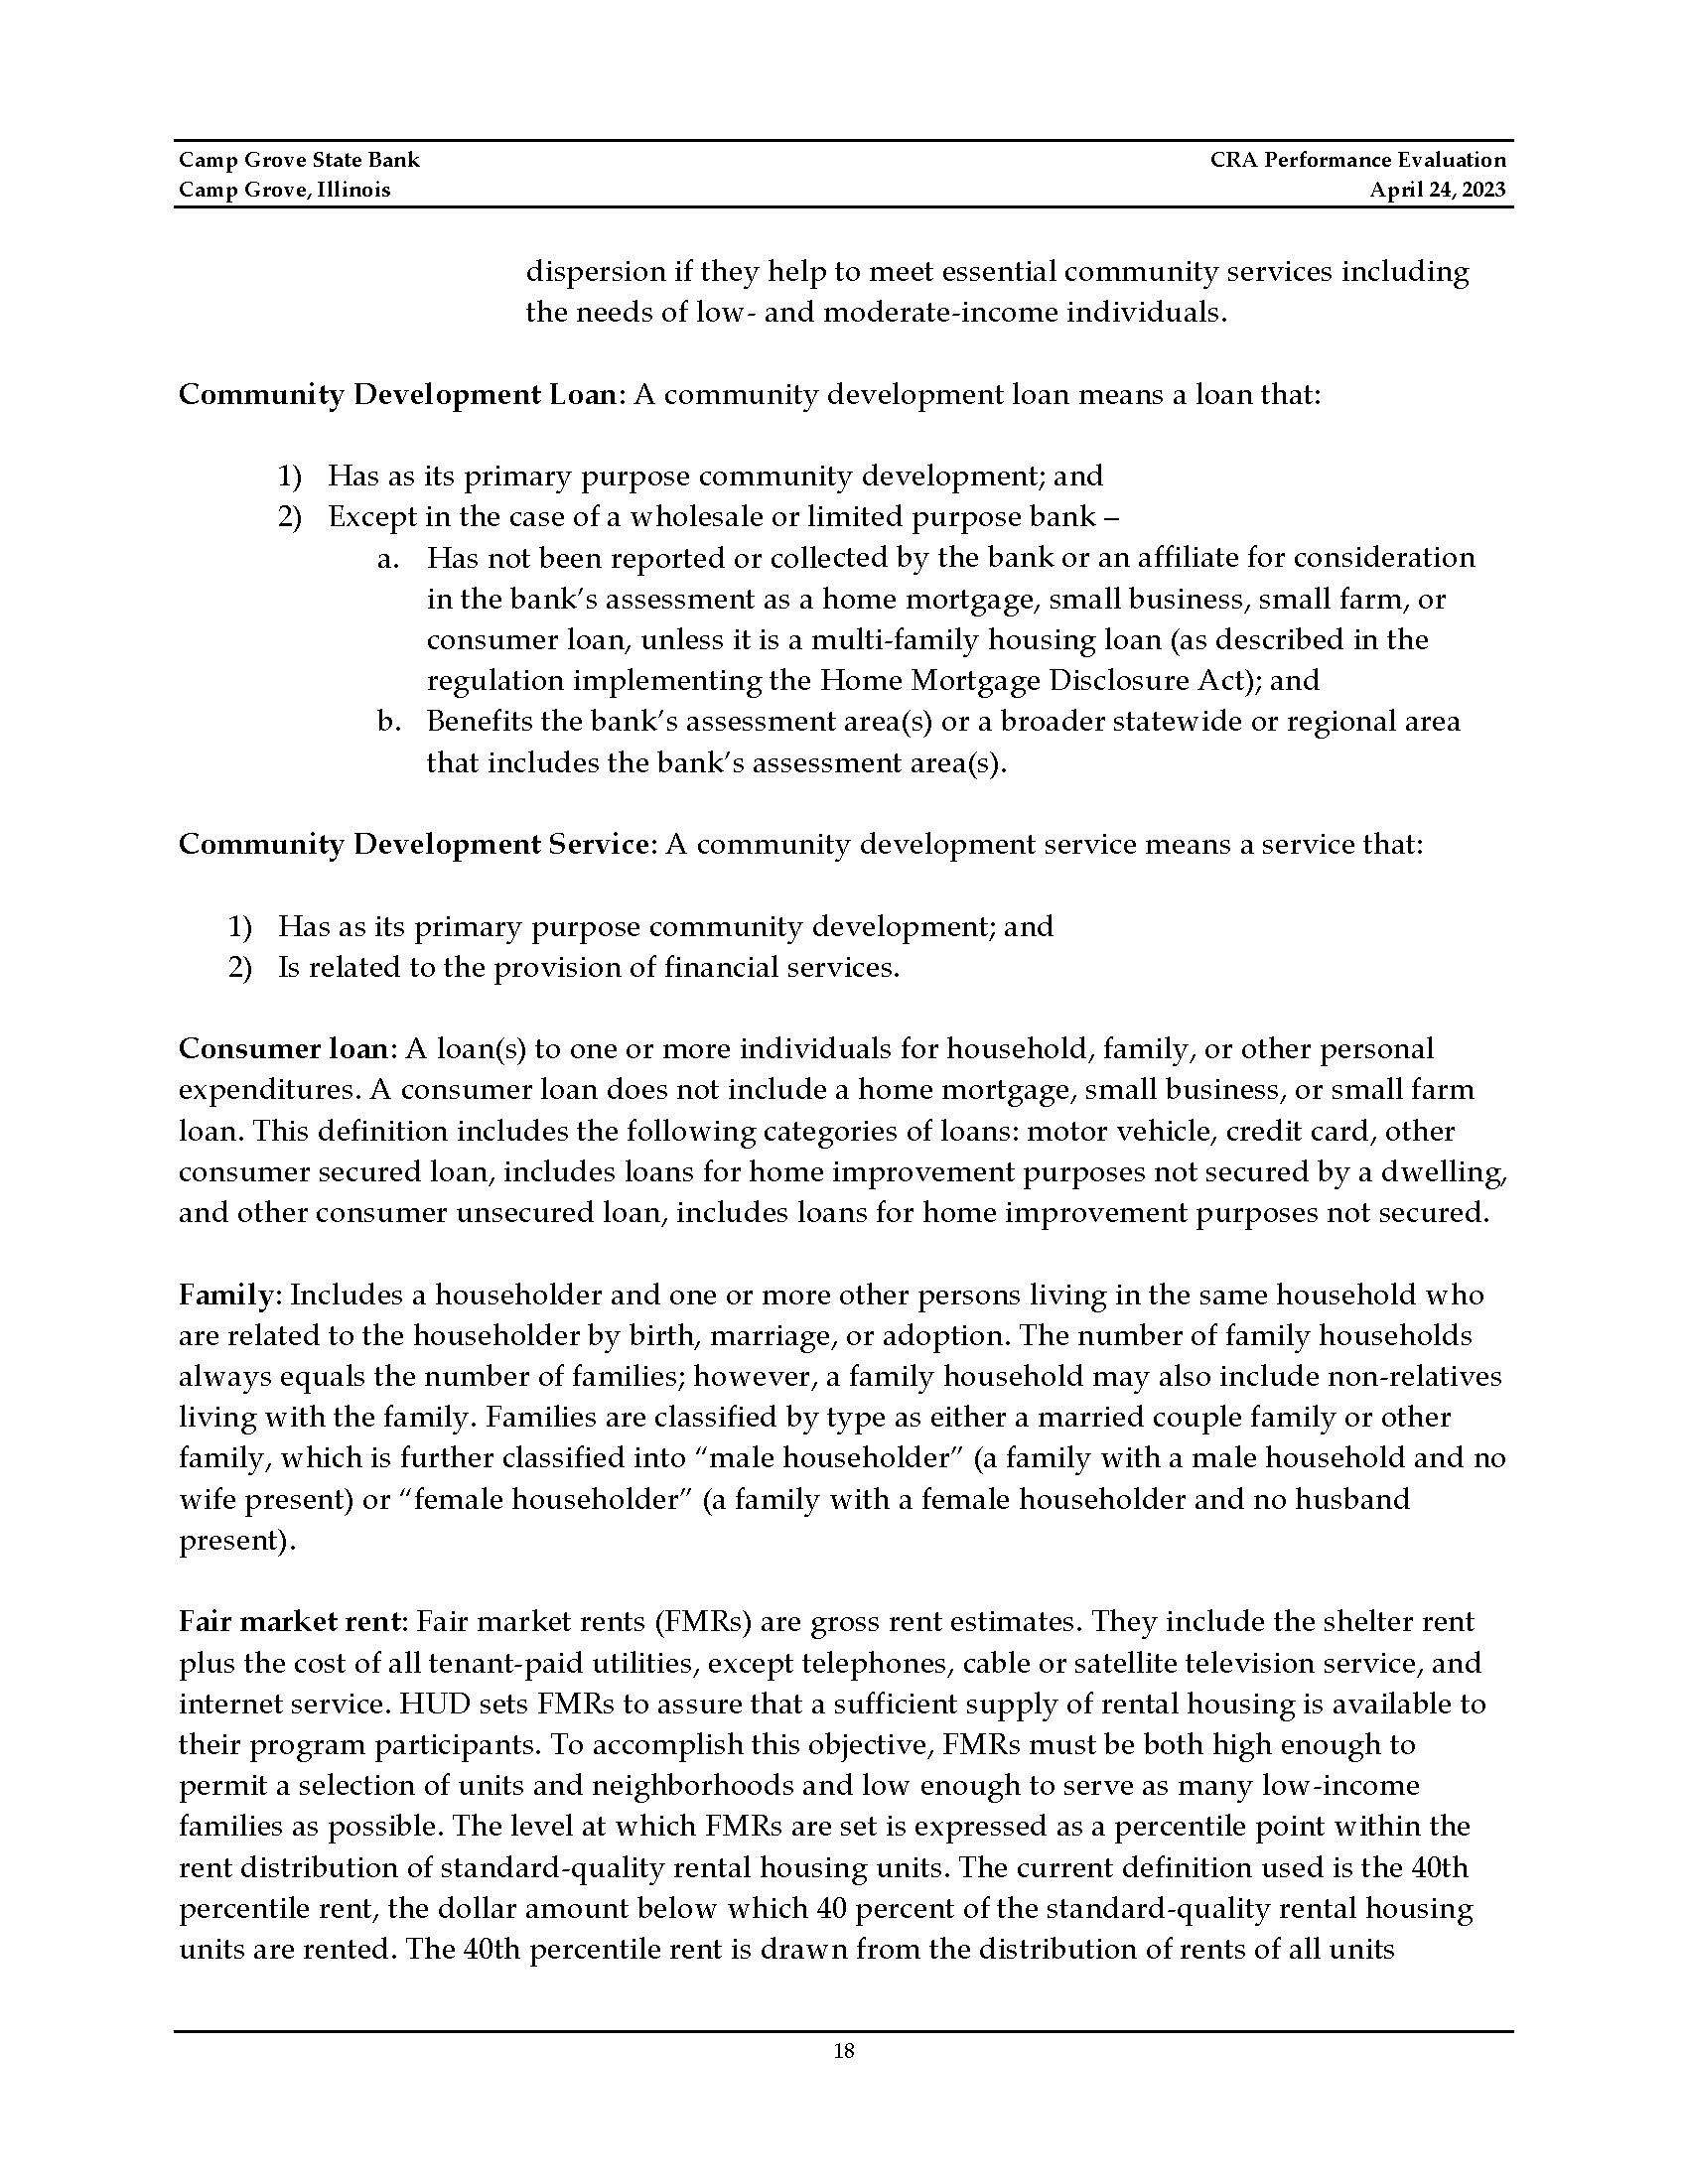 Community Reinvestment Act Page 21